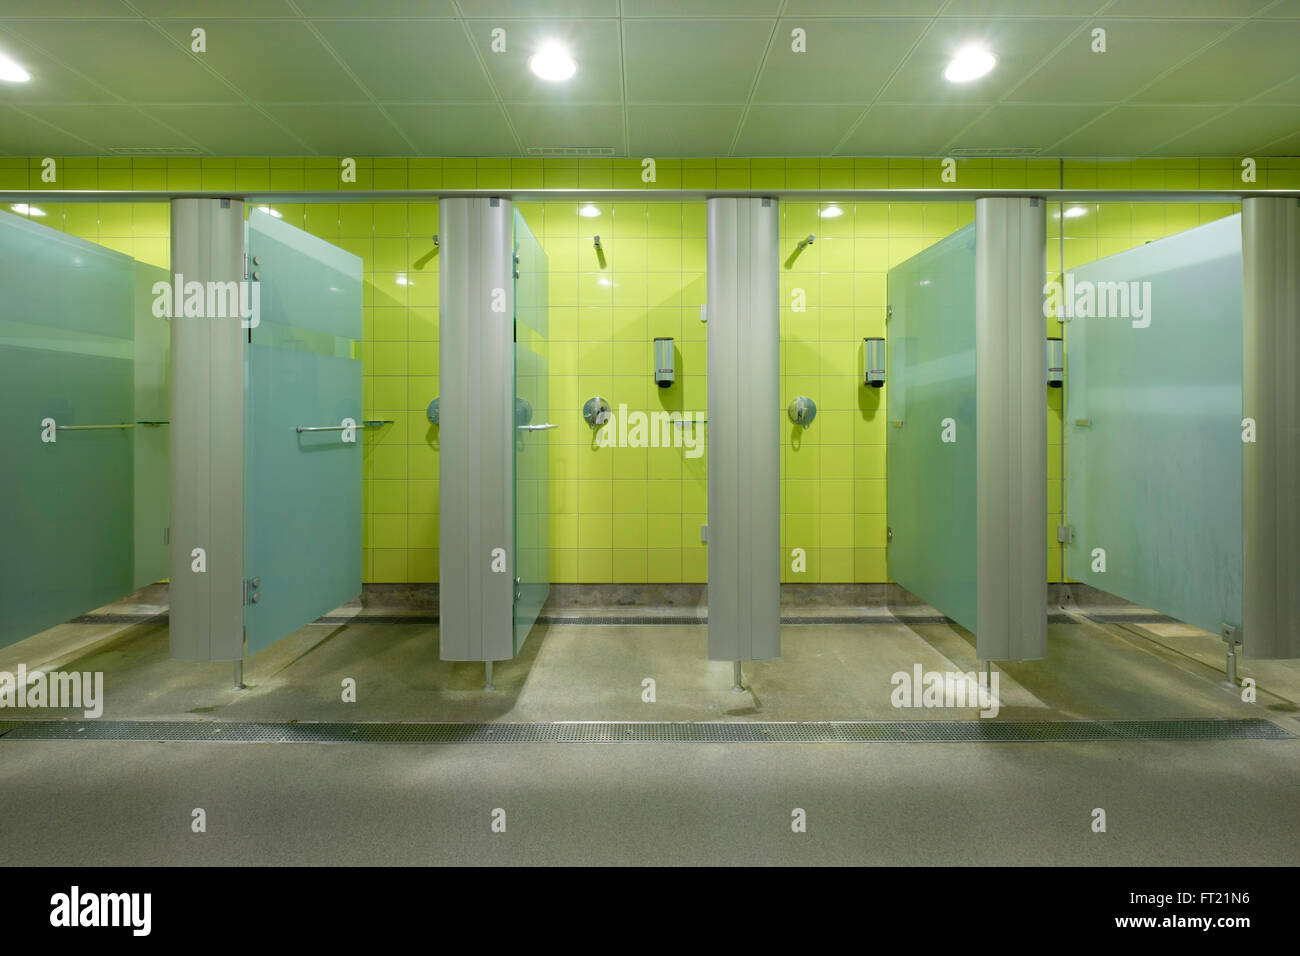 Gyms With Communal Showers Great Porn Site Without Registration 